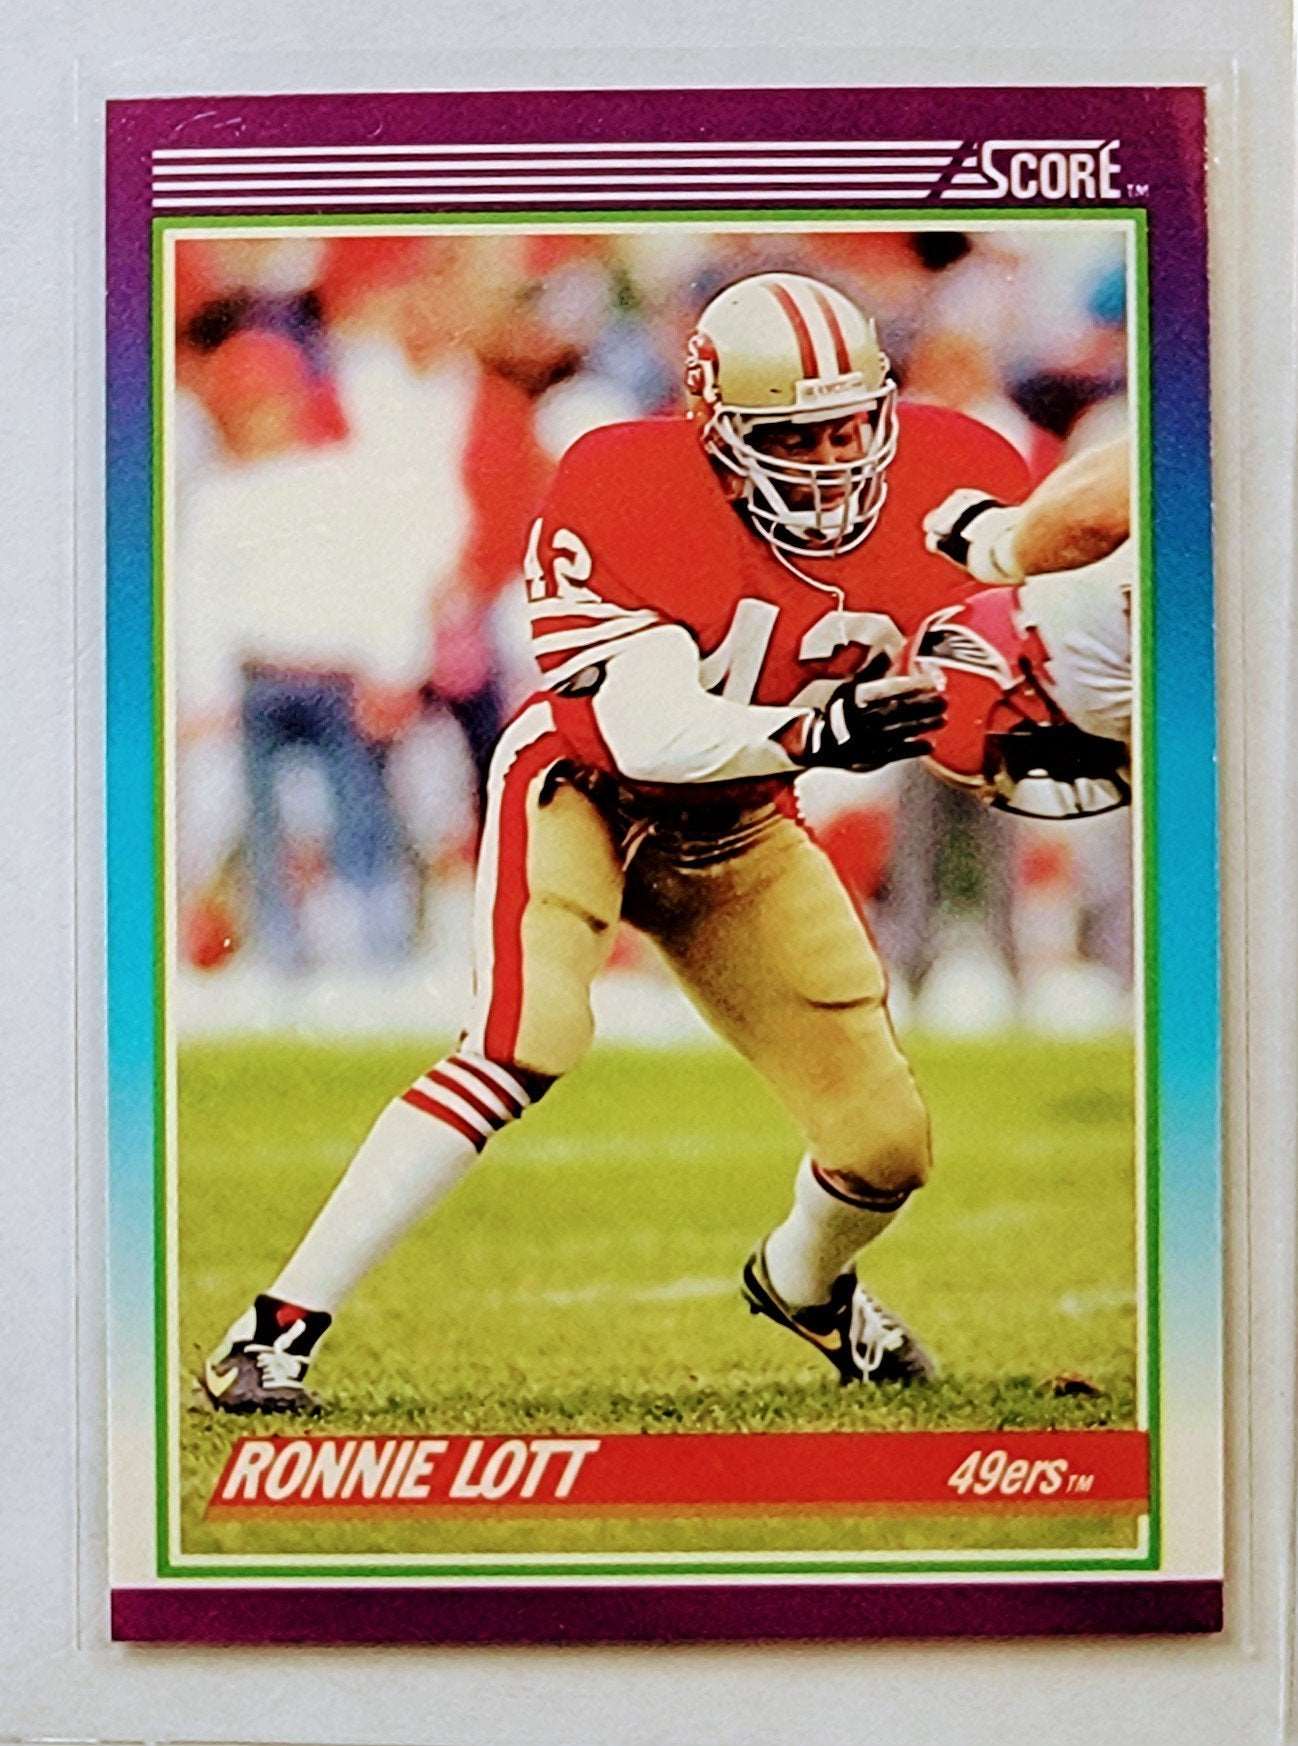 1990 Score Ronnie Lott Football Card AVM1 simple Xclusive Collectibles   